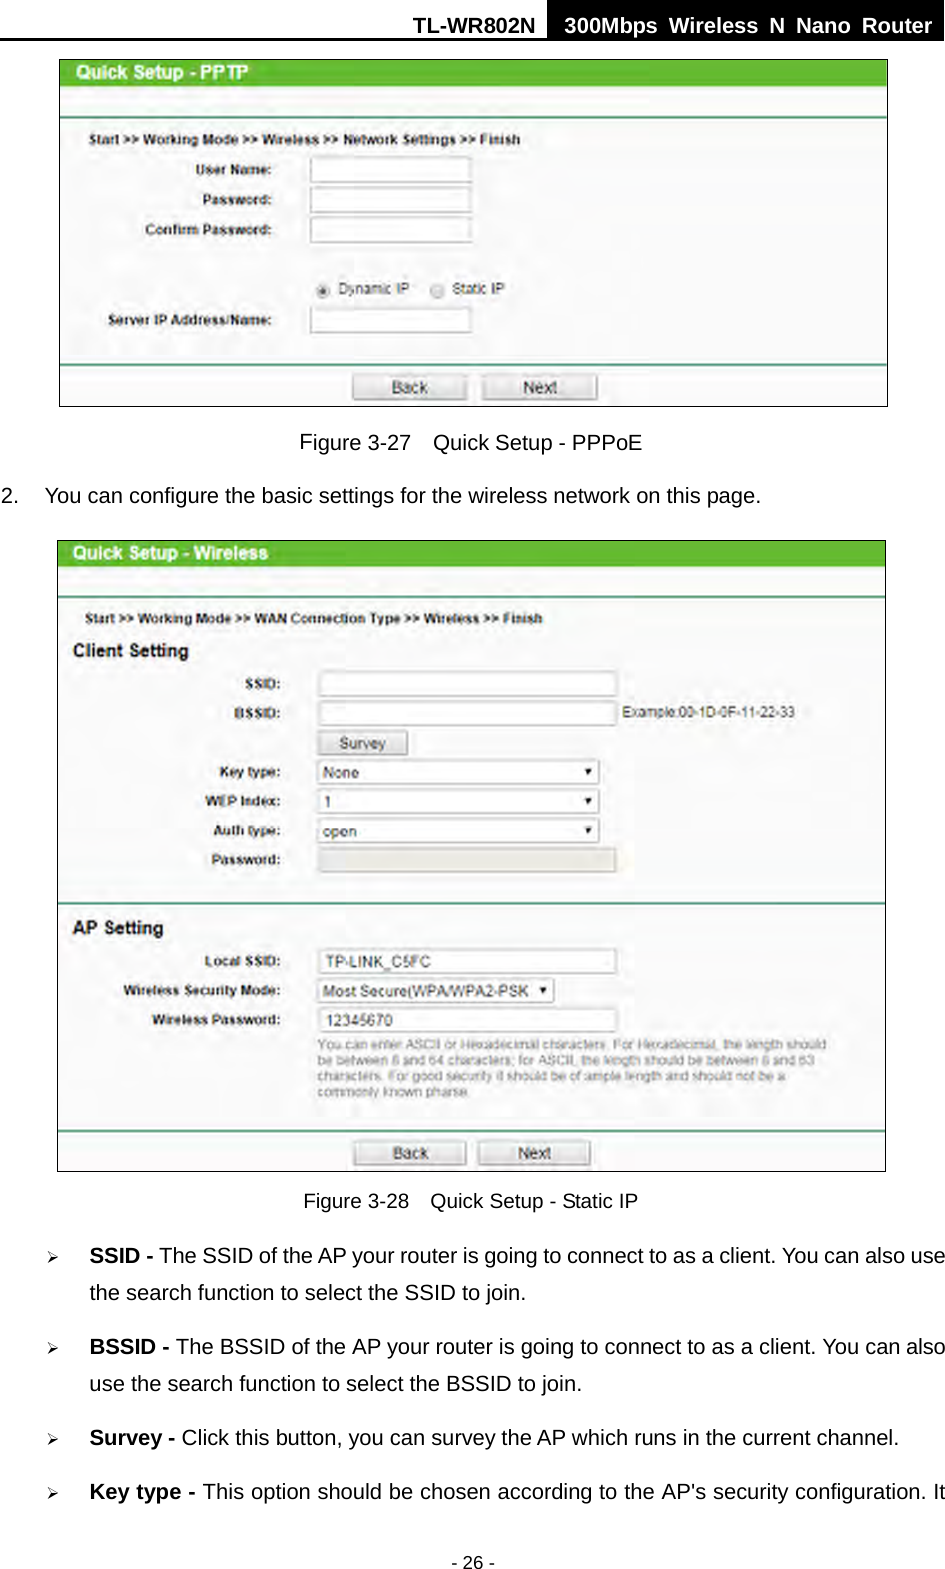 TL-WR802N  300Mbps Wireless N Nano Router   Figure 3-27  Quick Setup - PPPoE 2.  You can configure the basic settings for the wireless network on this page.  Figure 3-28  Quick Setup - Static IP  SSID - The SSID of the AP your router is going to connect to as a client. You can also use the search function to select the SSID to join.  BSSID - The BSSID of the AP your router is going to connect to as a client. You can also use the search function to select the BSSID to join.  Survey - Click this button, you can survey the AP which runs in the current channel.  Key type - This option should be chosen according to the AP&apos;s security configuration. It - 26 - 